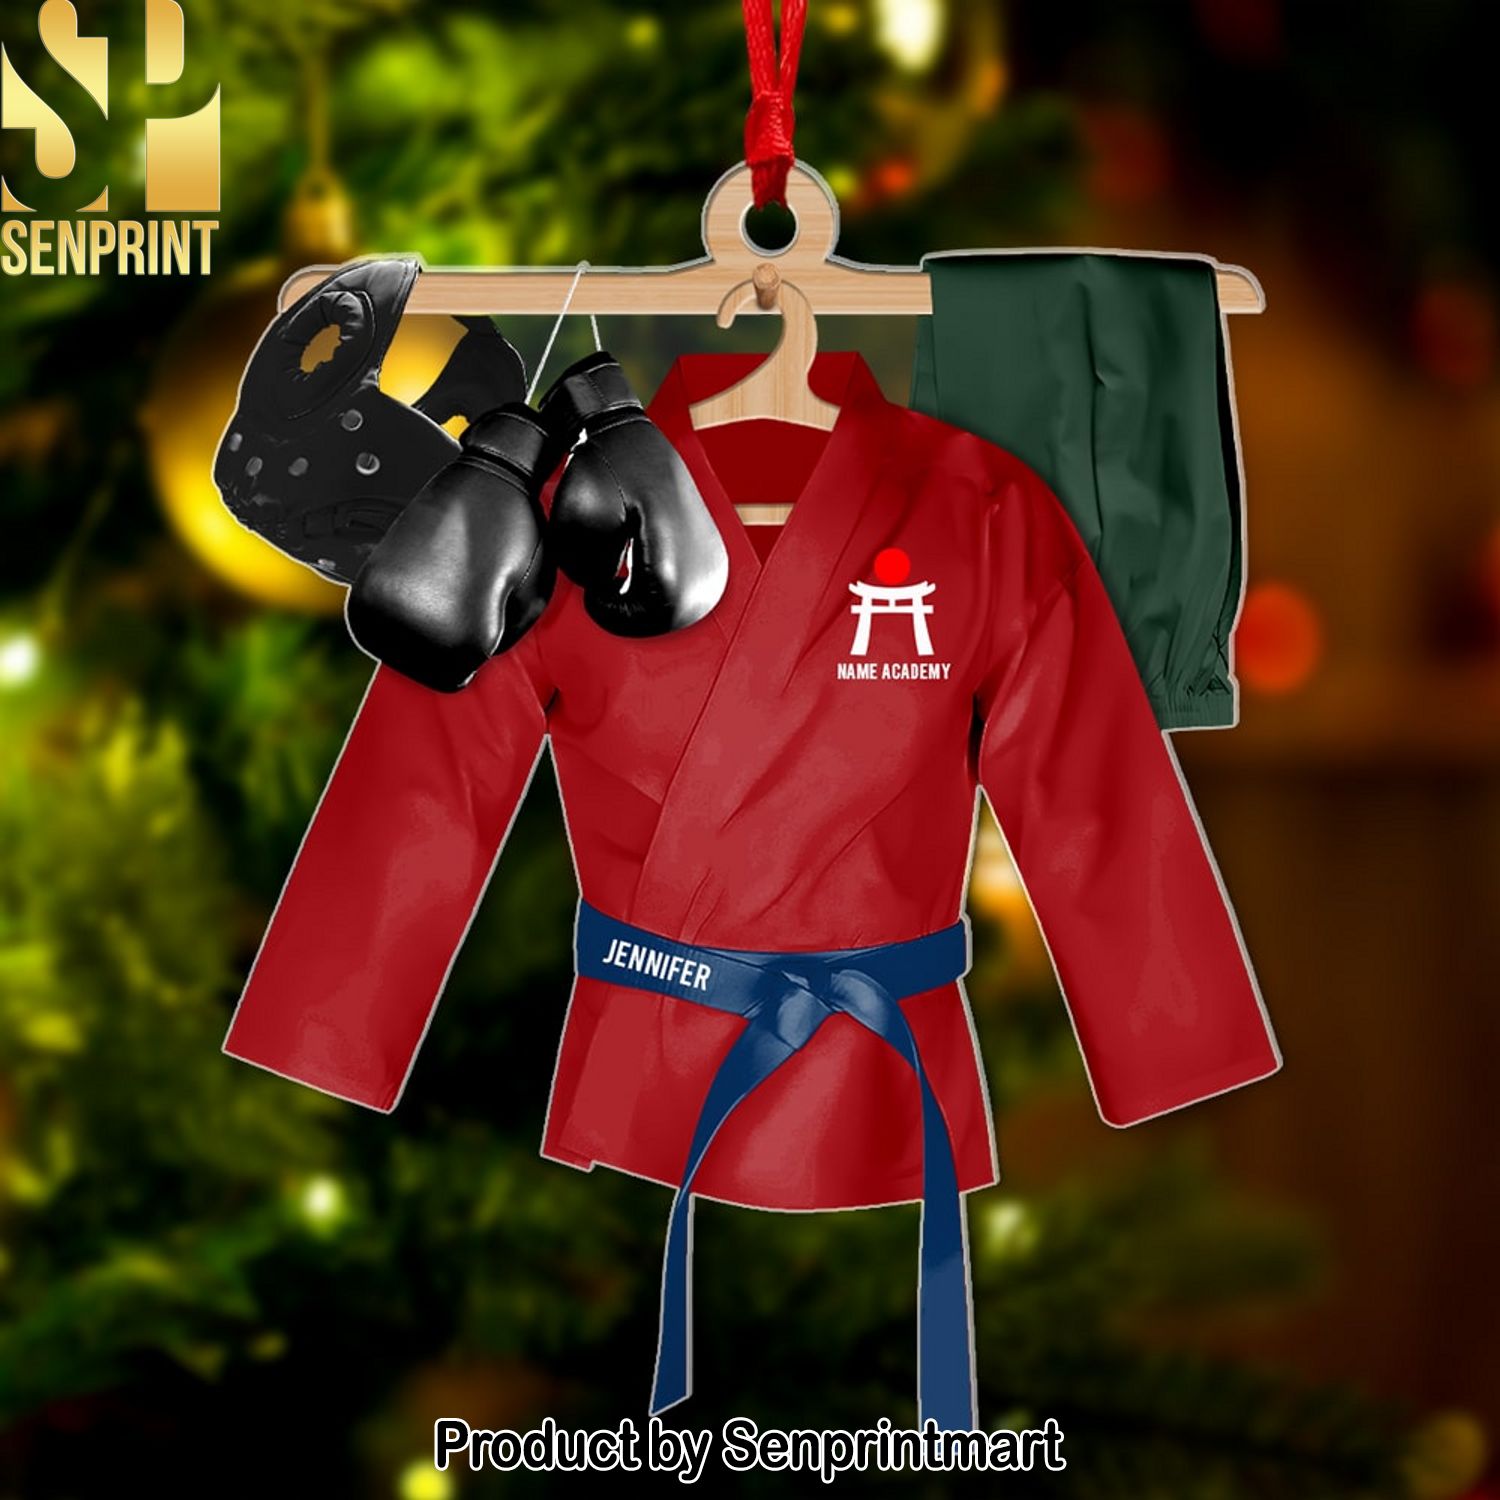 Karate Uniform Personalized Acrylic Ornament Karate Gifts Gift For Christmas